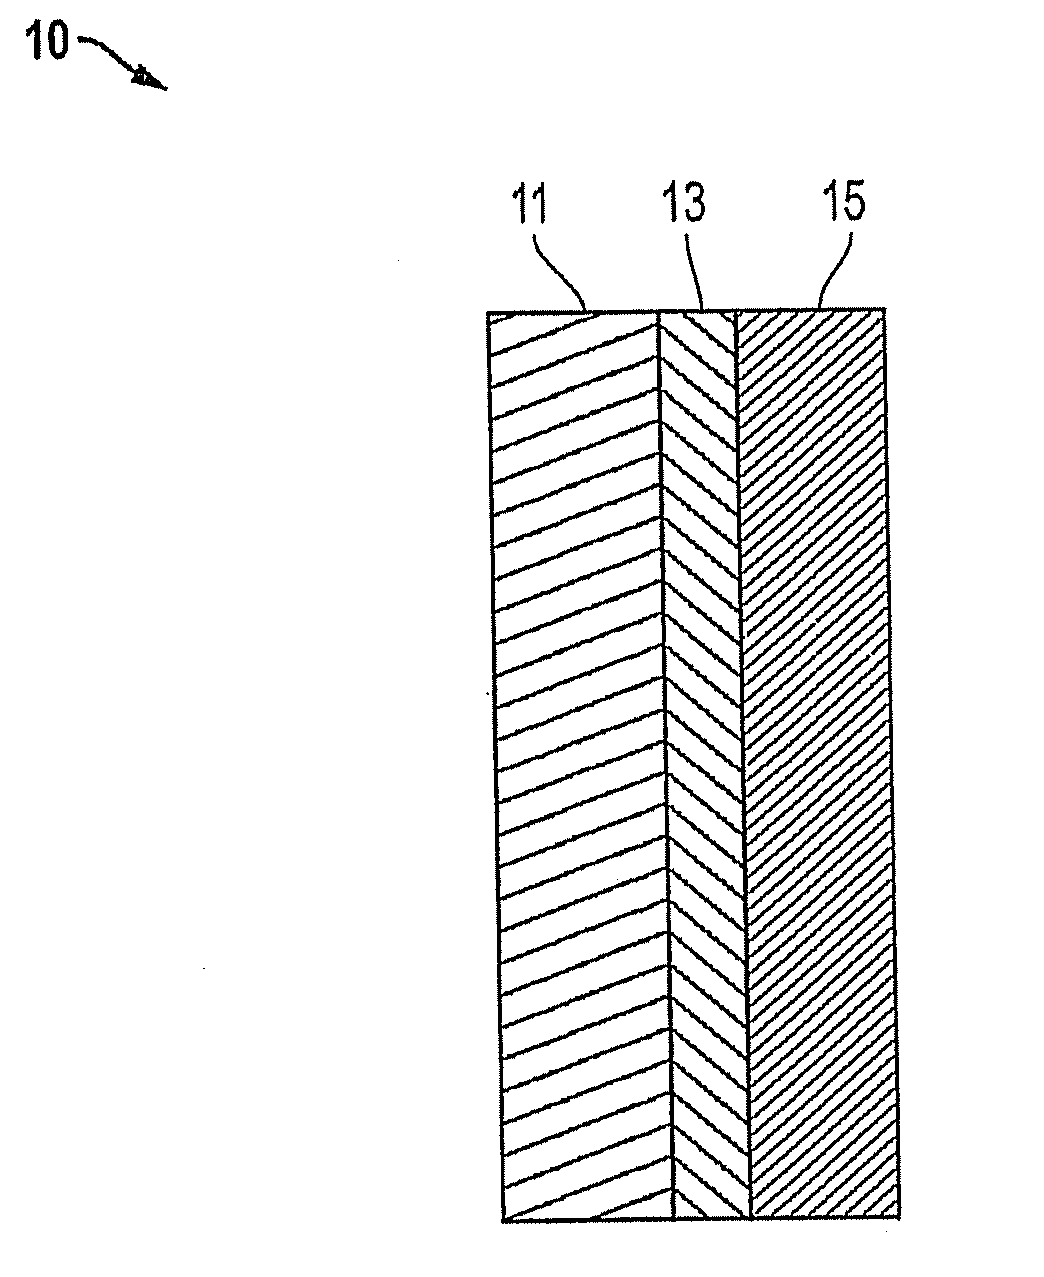 System, method, and apparatus for forming ballistic armor from ceramic and shape memory metallic alloy materials